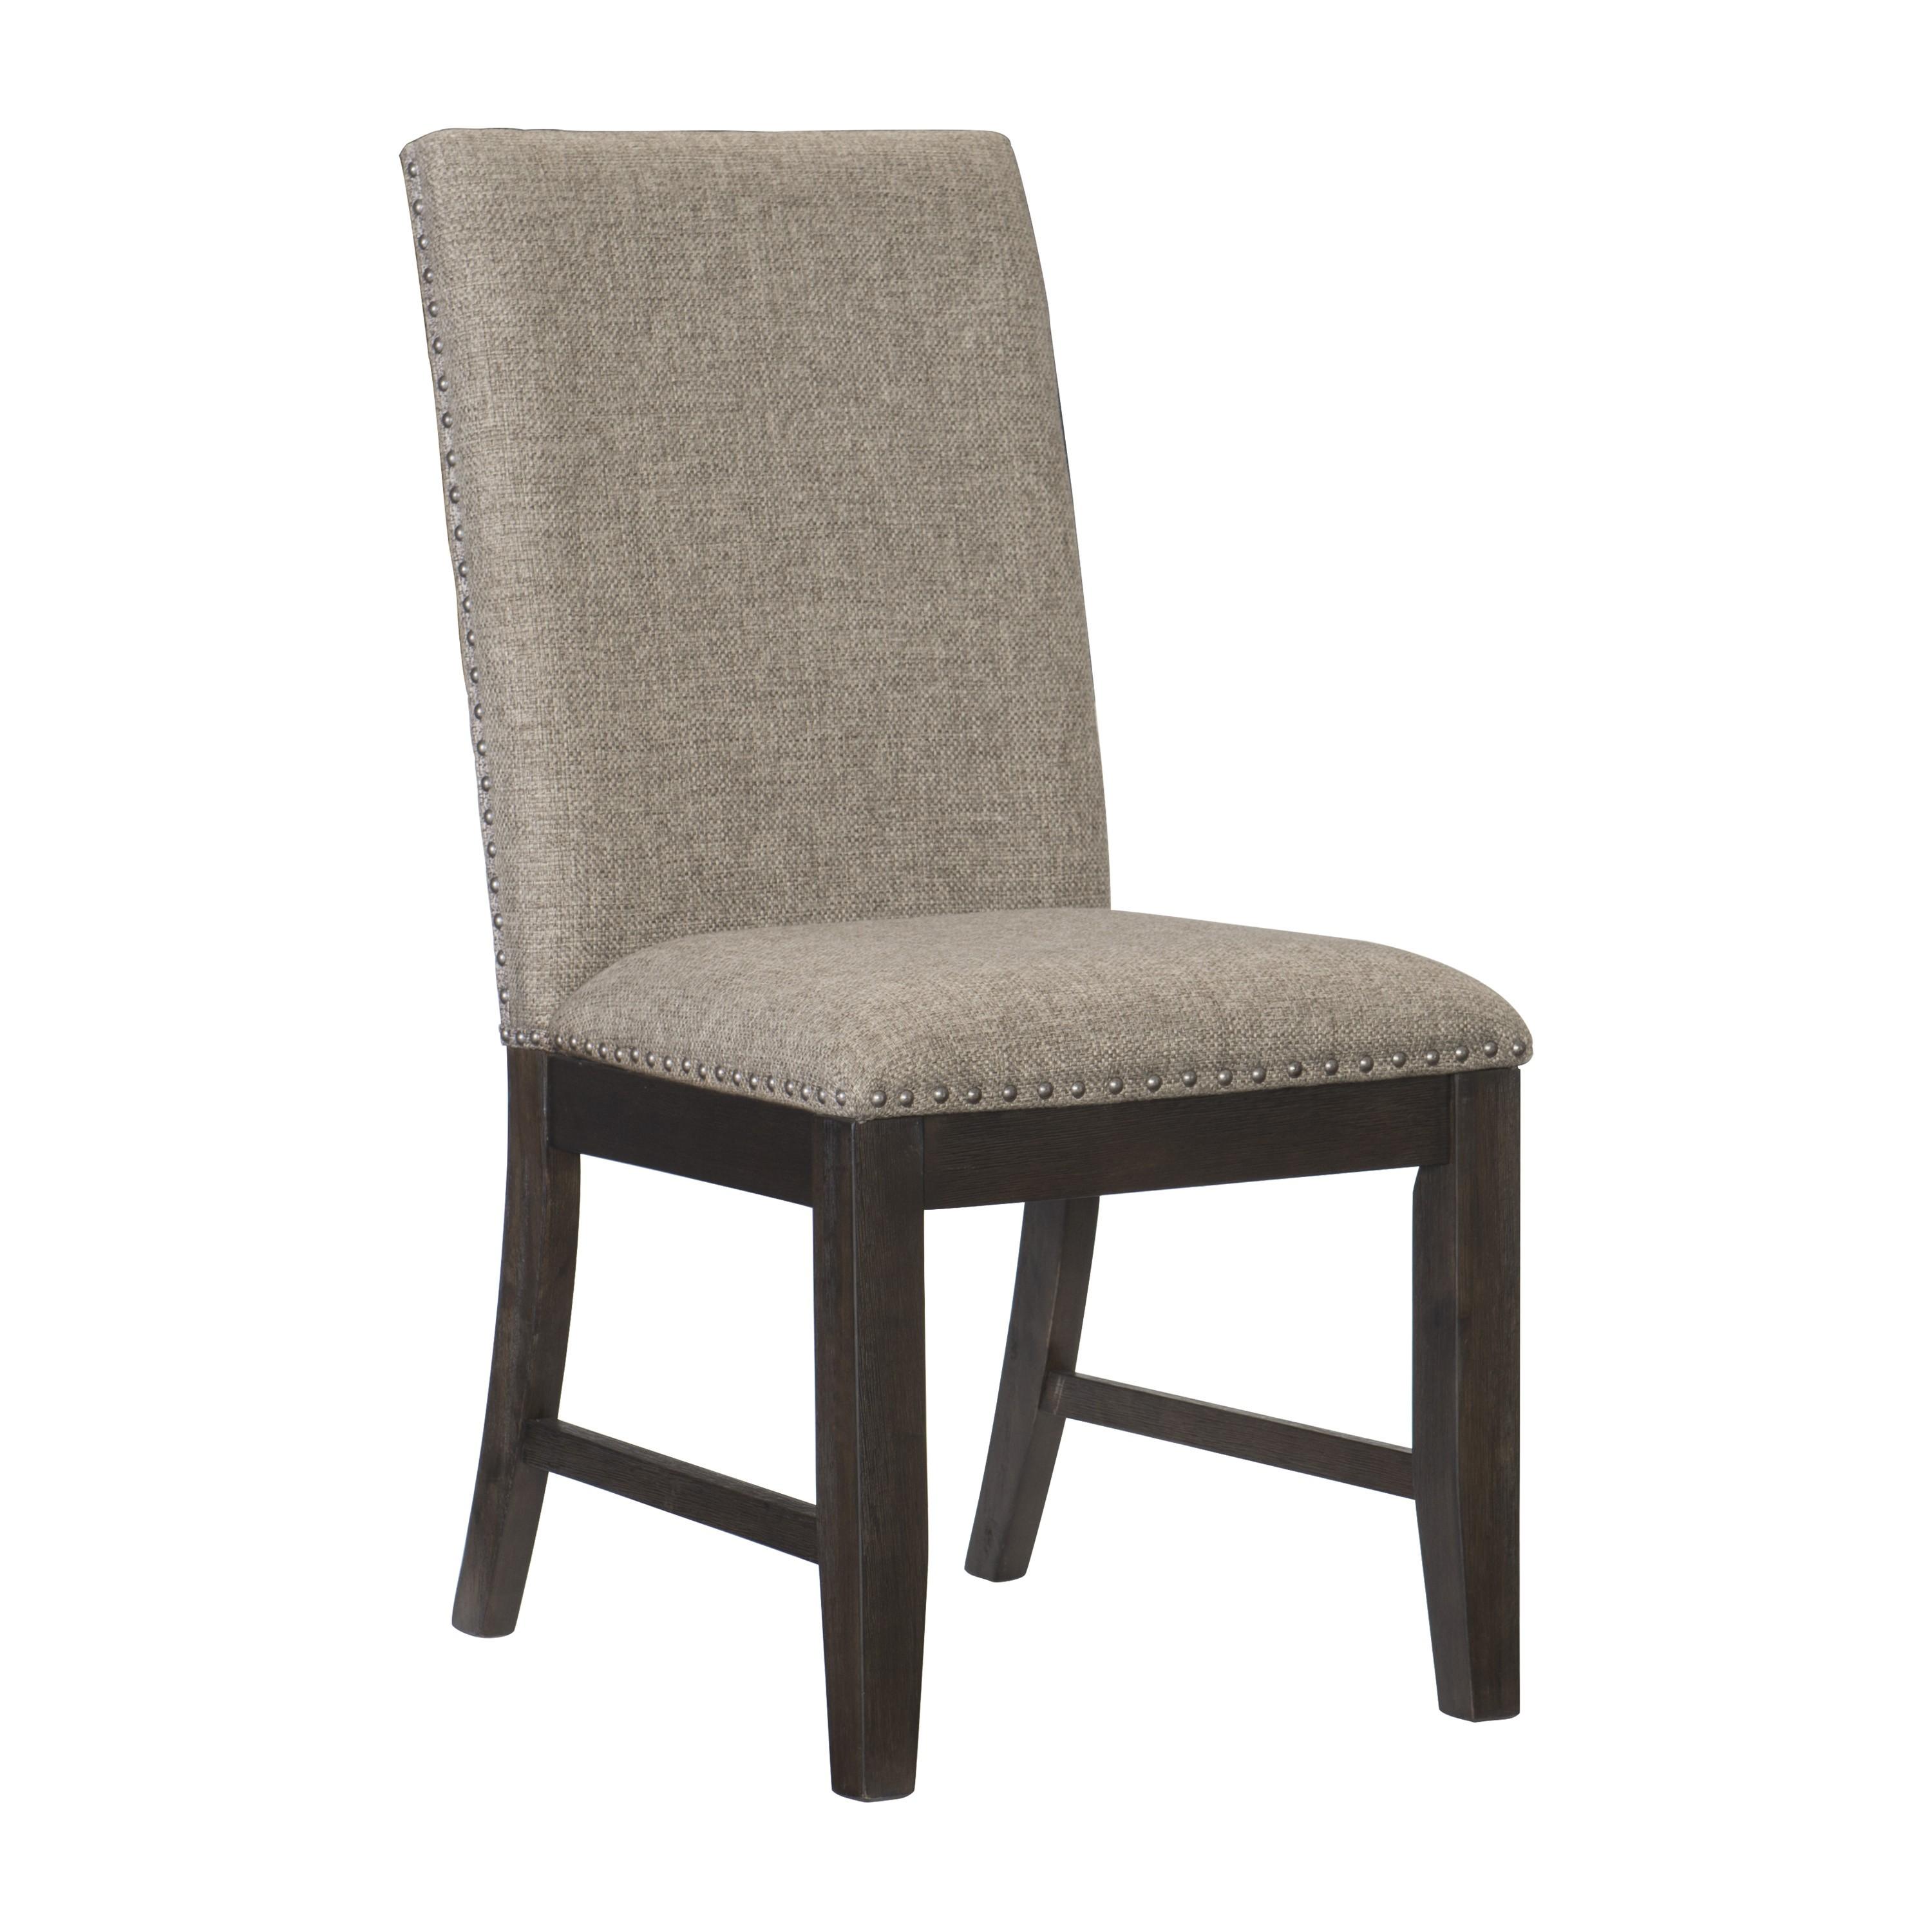 Traditional Side Chair Set 5741S Southlake 5741S in Rustic Brown Polyester